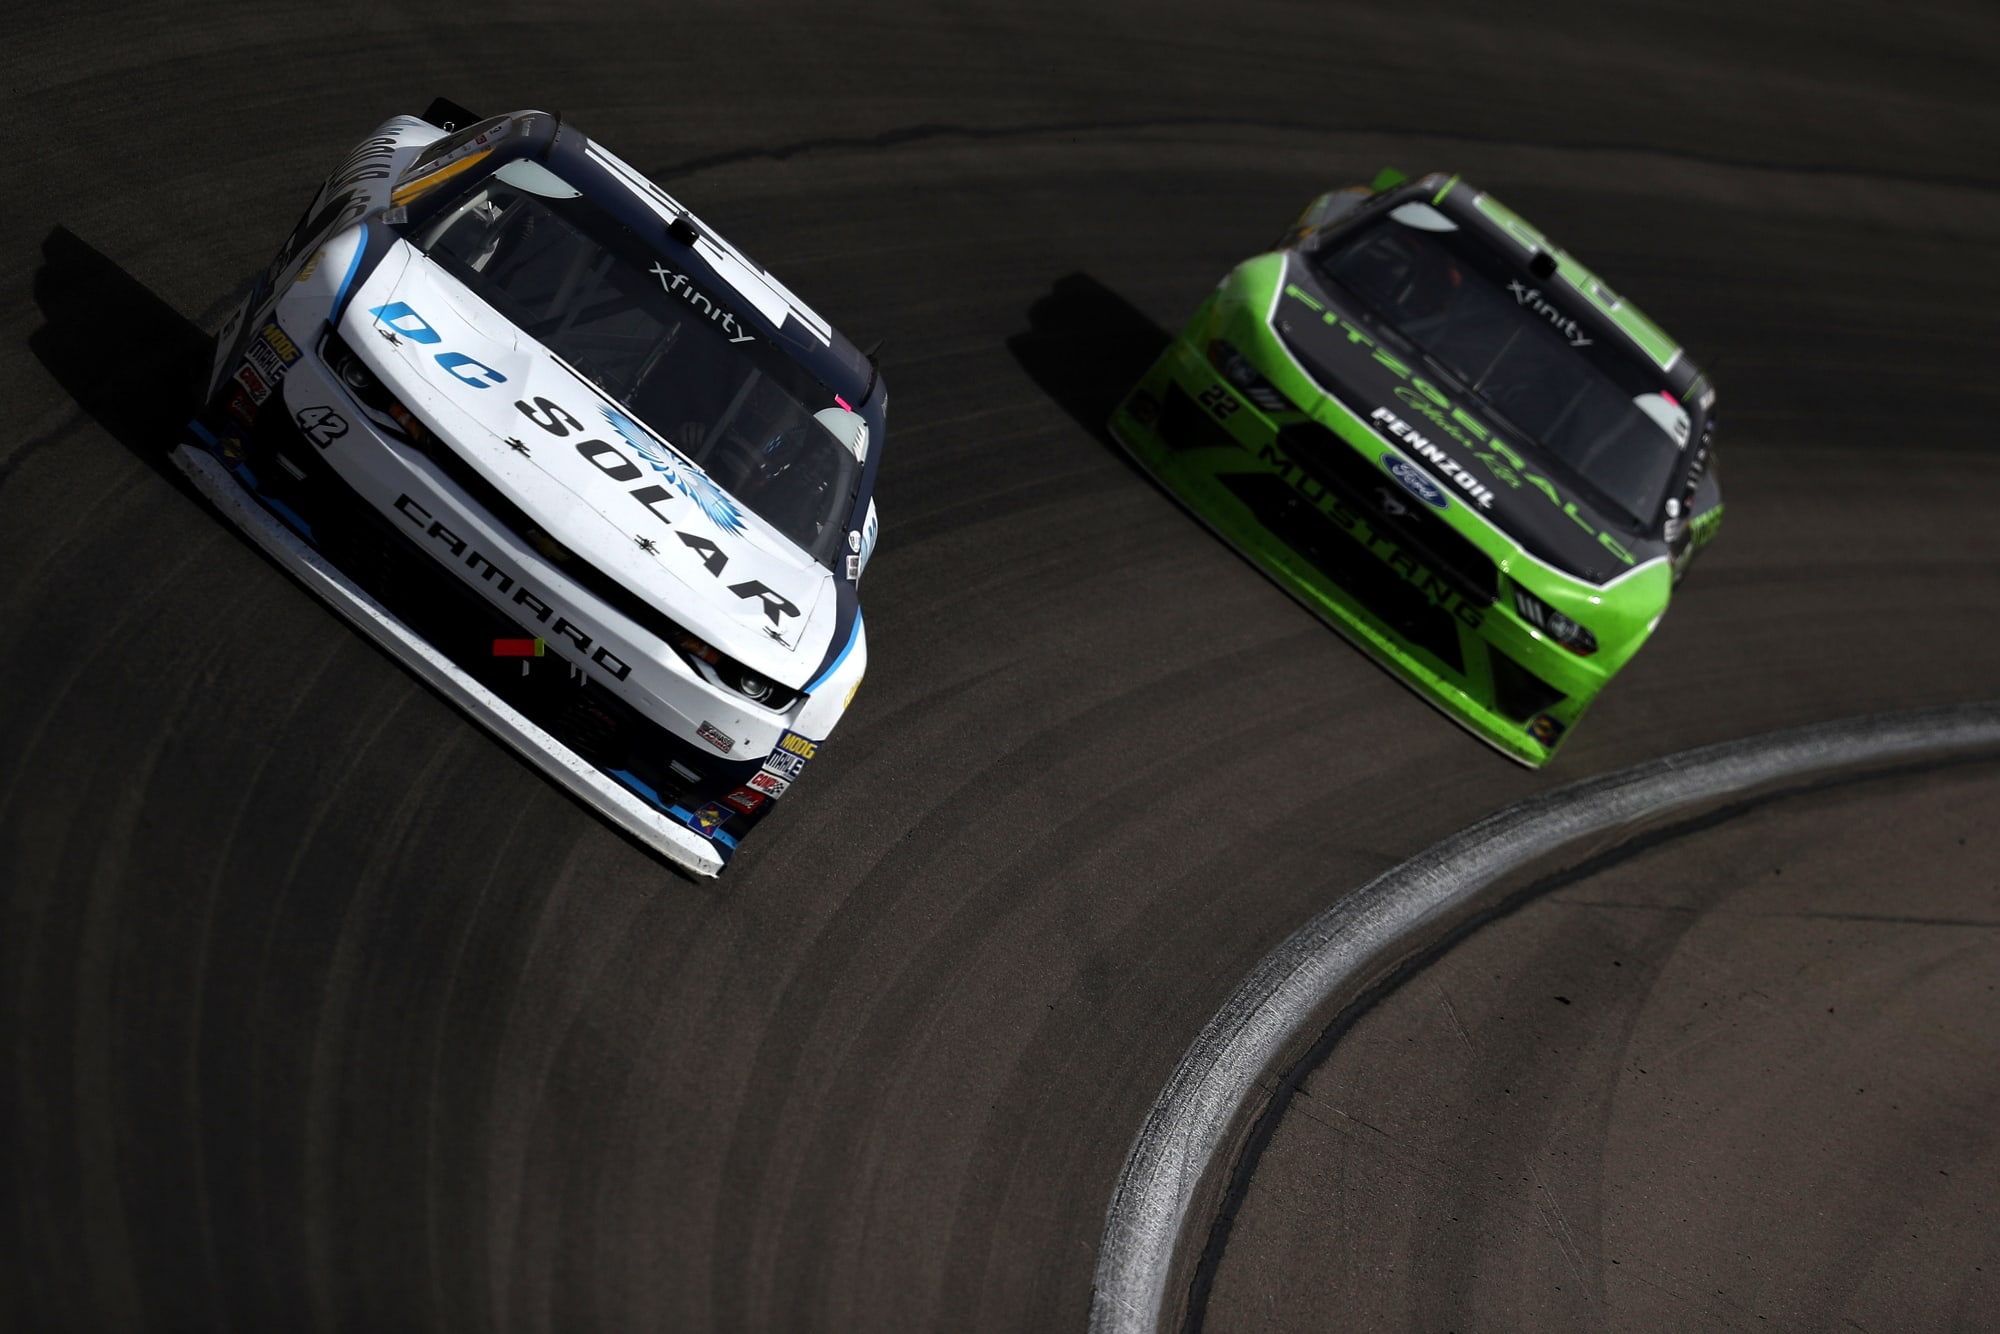 Las Vegas XFINITY Series race was a look into the future of NASCAR